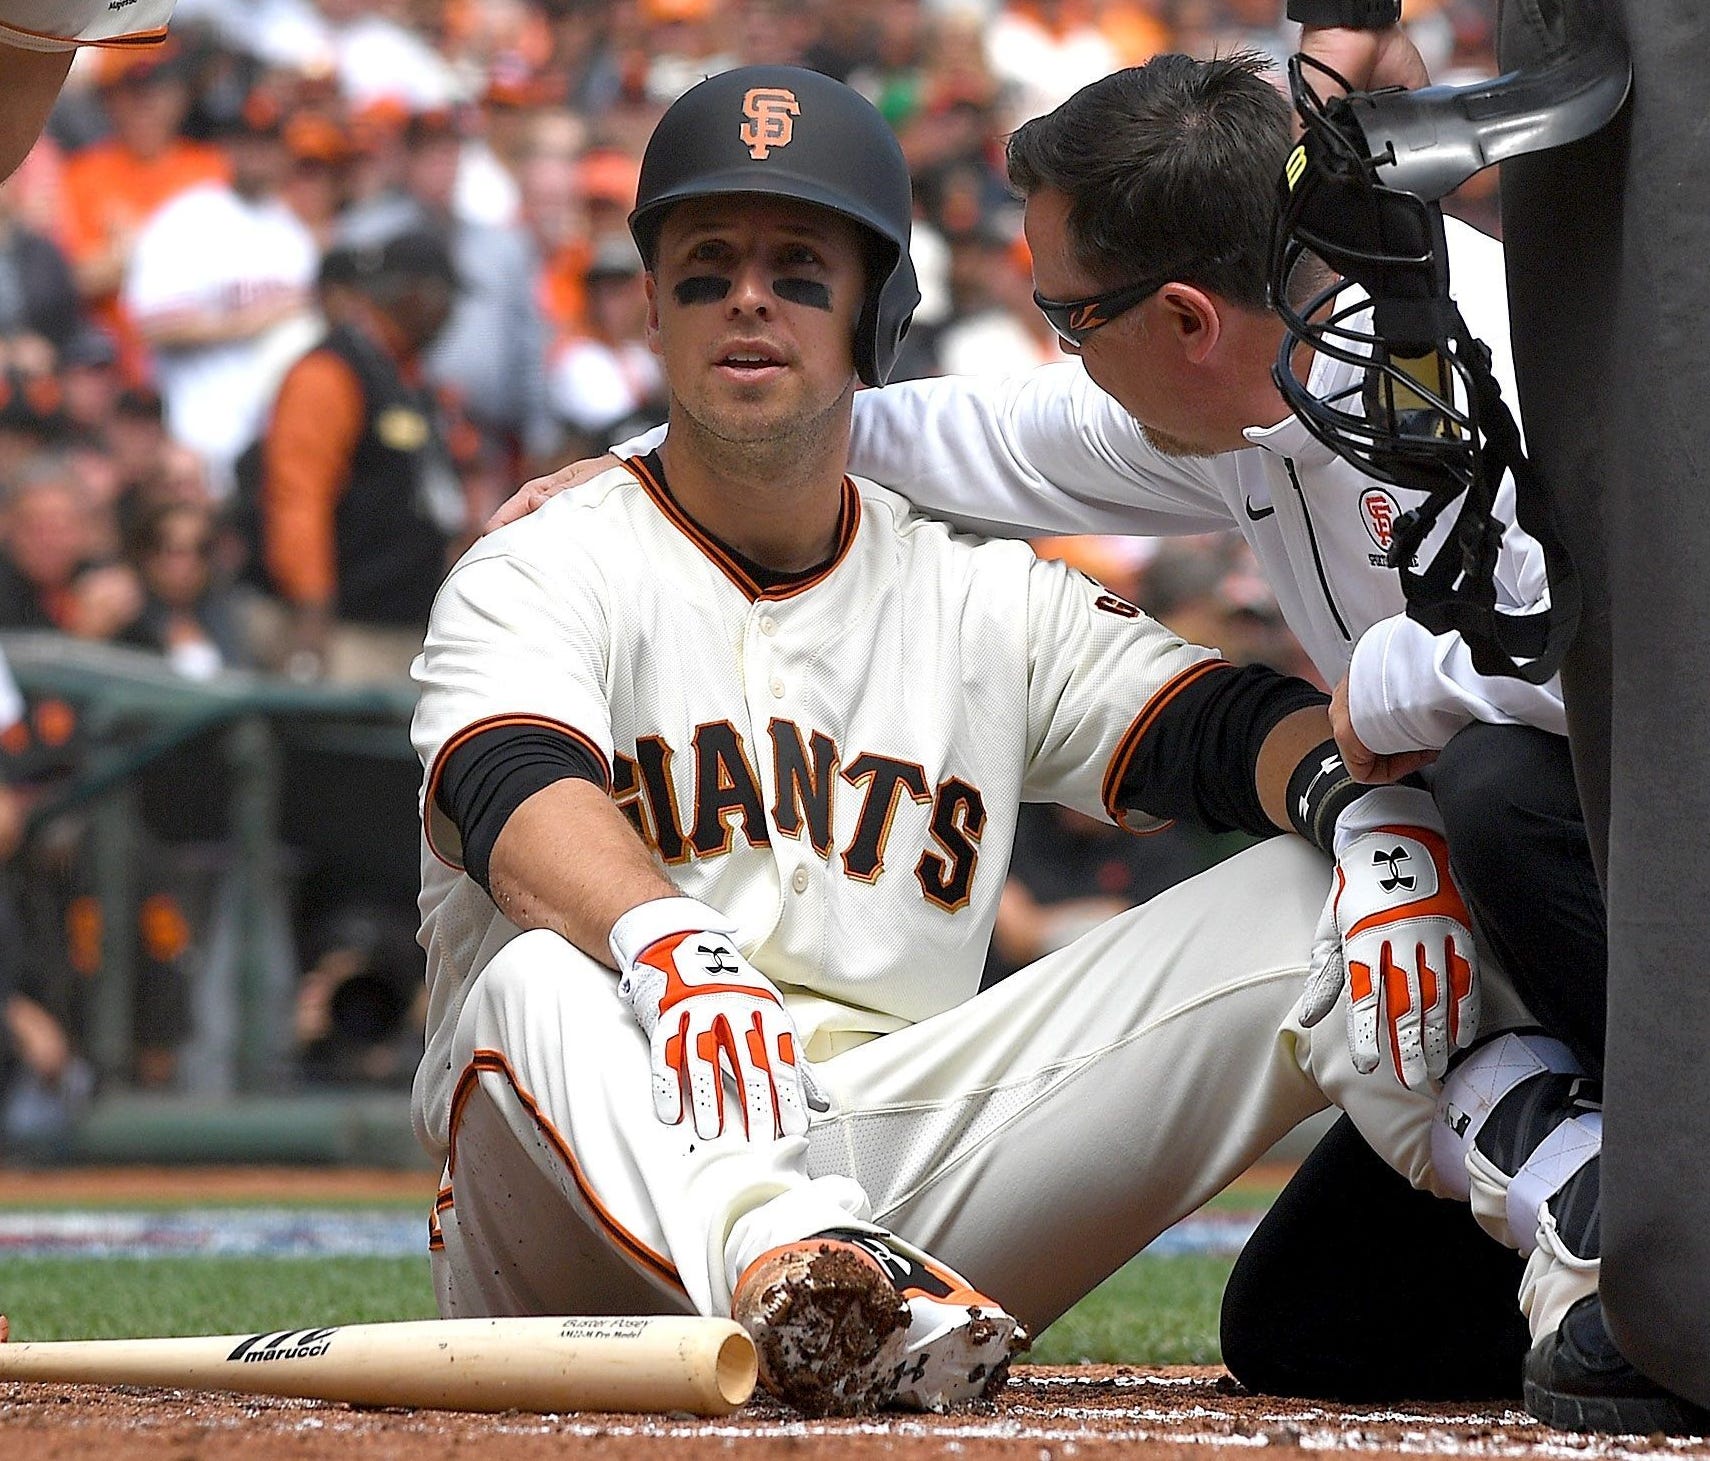 SAN FRANCISCO, CA - APRIL 10:  Buster Posey #28 of the San Francisco Giants sits on the ground and is checked on by manger Bruce Bochy #15 and trainer Dave Groeschner after Posey was hit in the head with a pitch in the bottom of the first inning at A